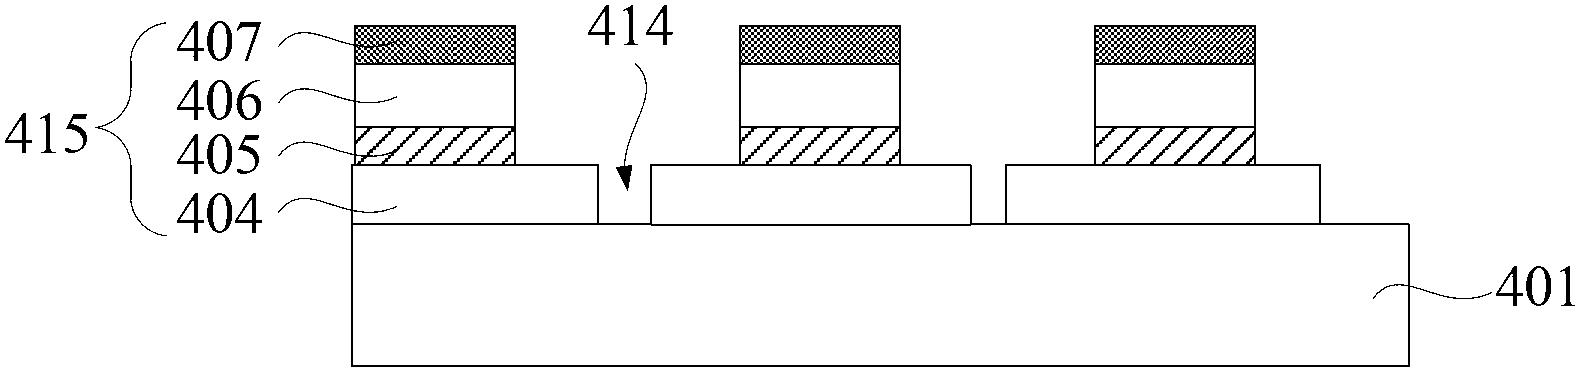 LED (light emitting diode) display screen and manufacture method thereof